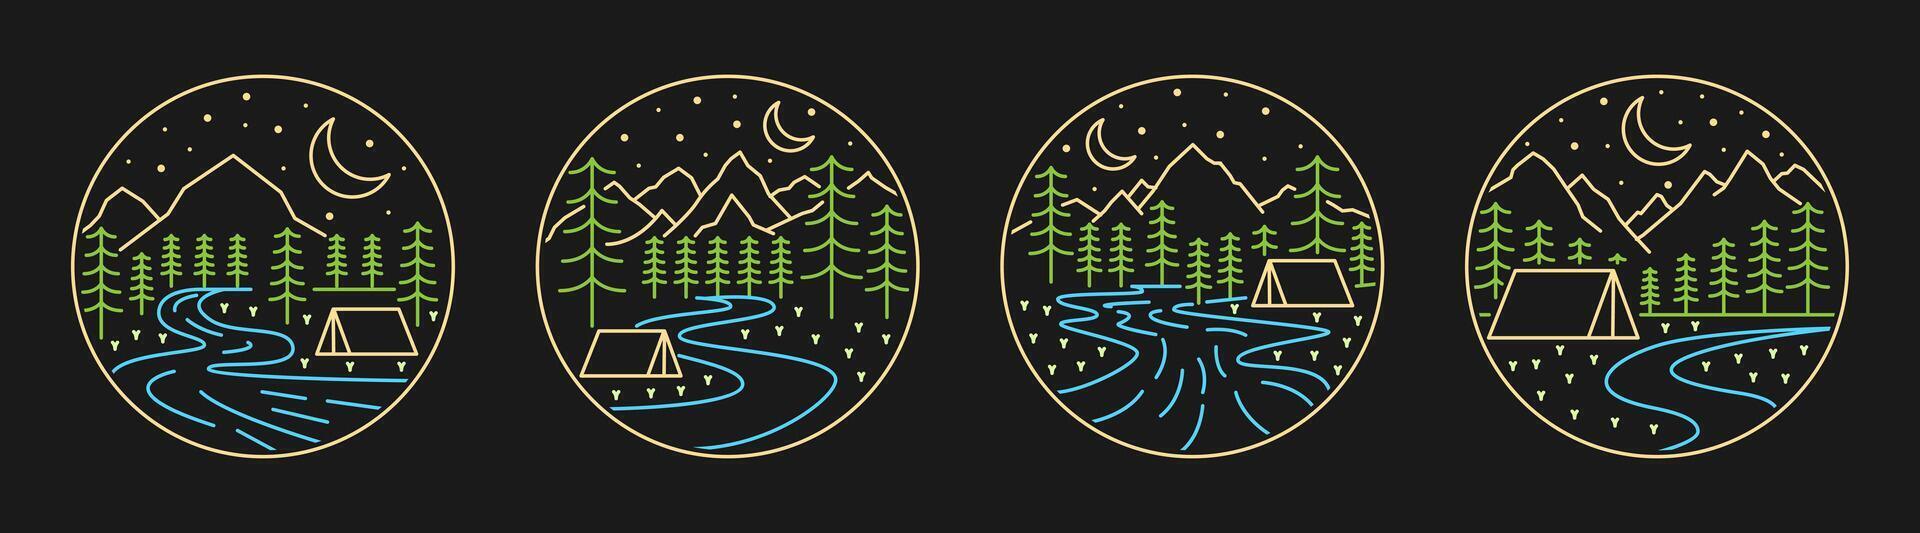 Collection of camping and mountain illustration with monoline or line art style black background, design can be for t-shirts, sticker, printing needs vector